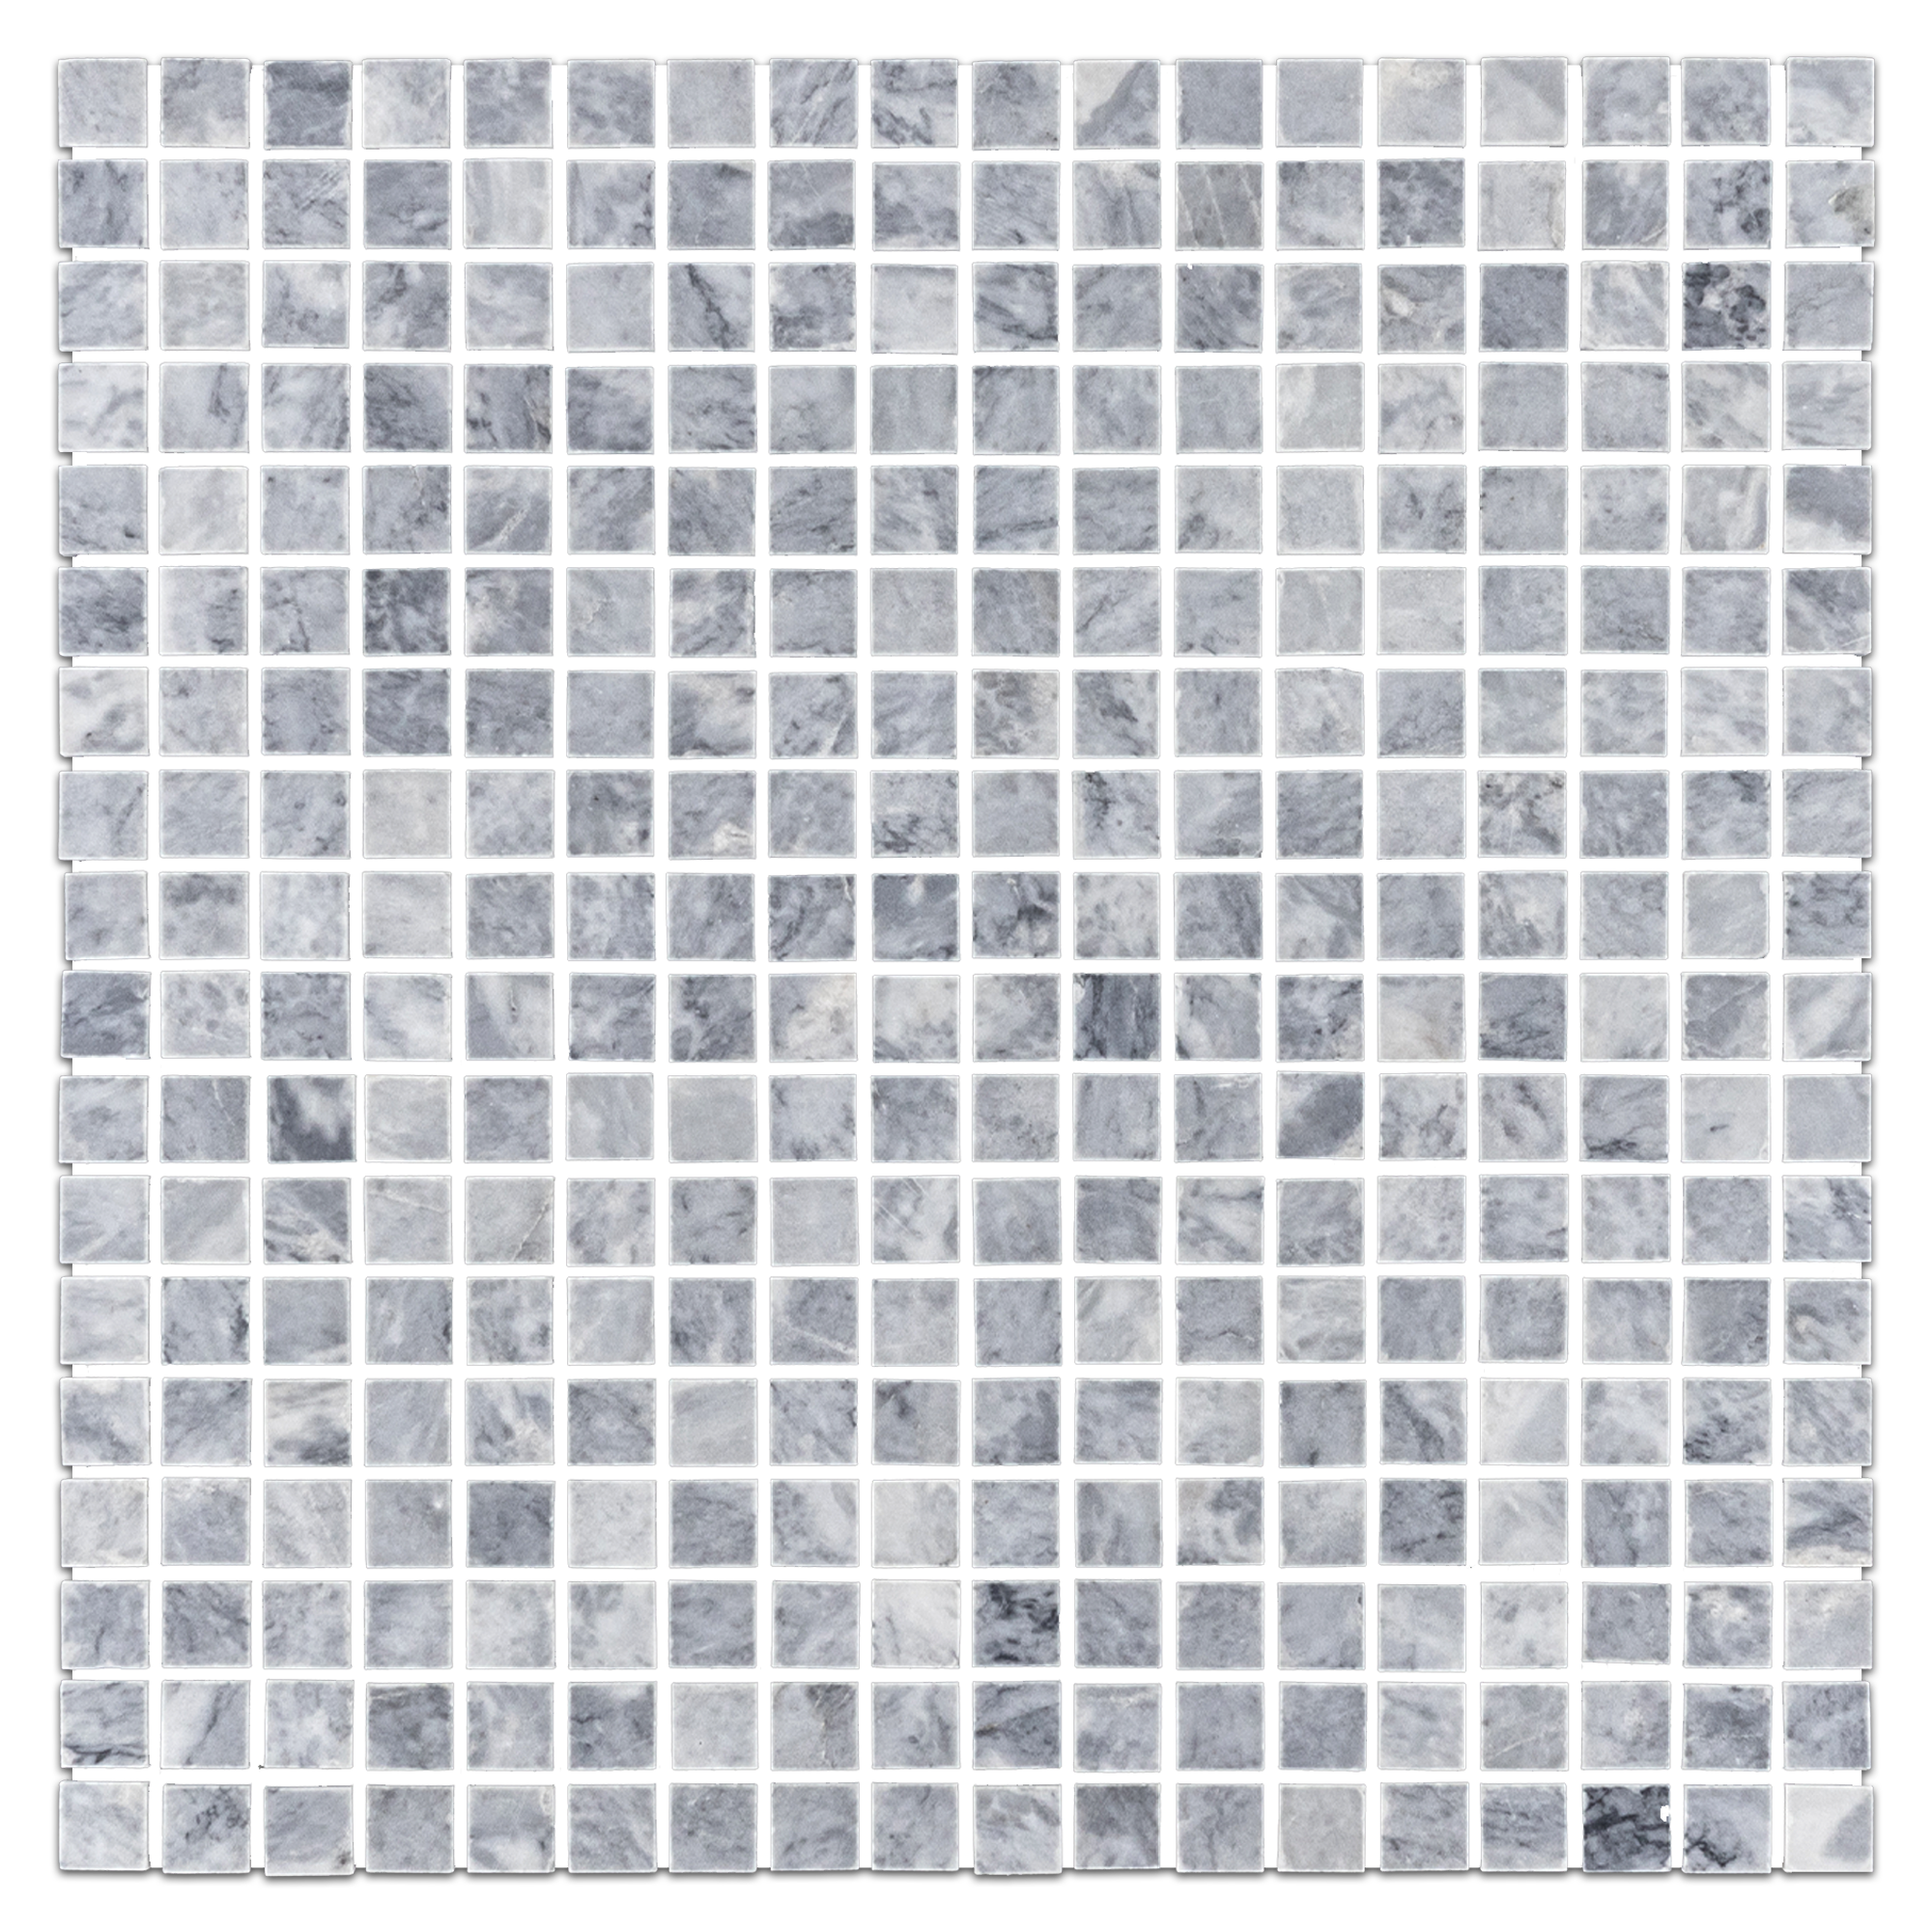 Elon Pacific Gray Marble Mosaic Tile 12x12x0.375 Polished - Surface Group Online Tile Store